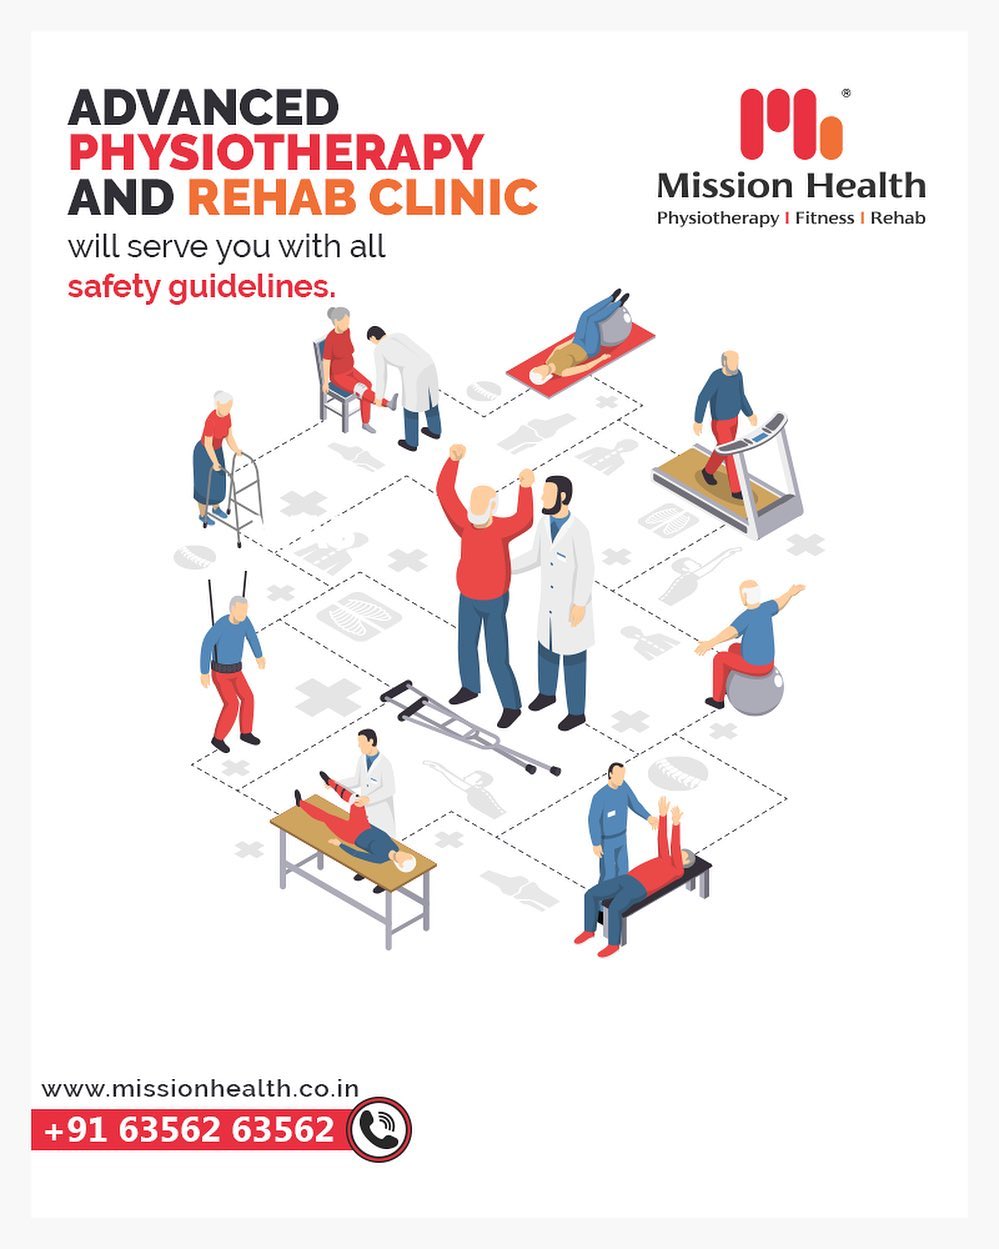 Mission Health Advanced Physiotherapy & Rehab Clinic will serve you with all safety guidelines. 
This unexpected situation has put many in Pain without their regular Physiotherapy  sessions under the supervision of our Physio Experts. Thankfully, its the time to Re-Start your Physiotherapy and go Pain-Free.

Contact us for appointments and session time schedules.

Call +916356263562
www.missionhealth.co.in

#IndiaFightsCorona #Coronavirus #stayathome #lockdownopd #neurorehab #strokerehab #stroke #strokesurvior #openingsoon #physiotherapy #physiotherapist #neckpain #jointpain #backpain #spineproblems #slippeddisc #stiffness #stress #panic #workfromhome #MissionHealth #MissionHealthIndia #MovementIsLife